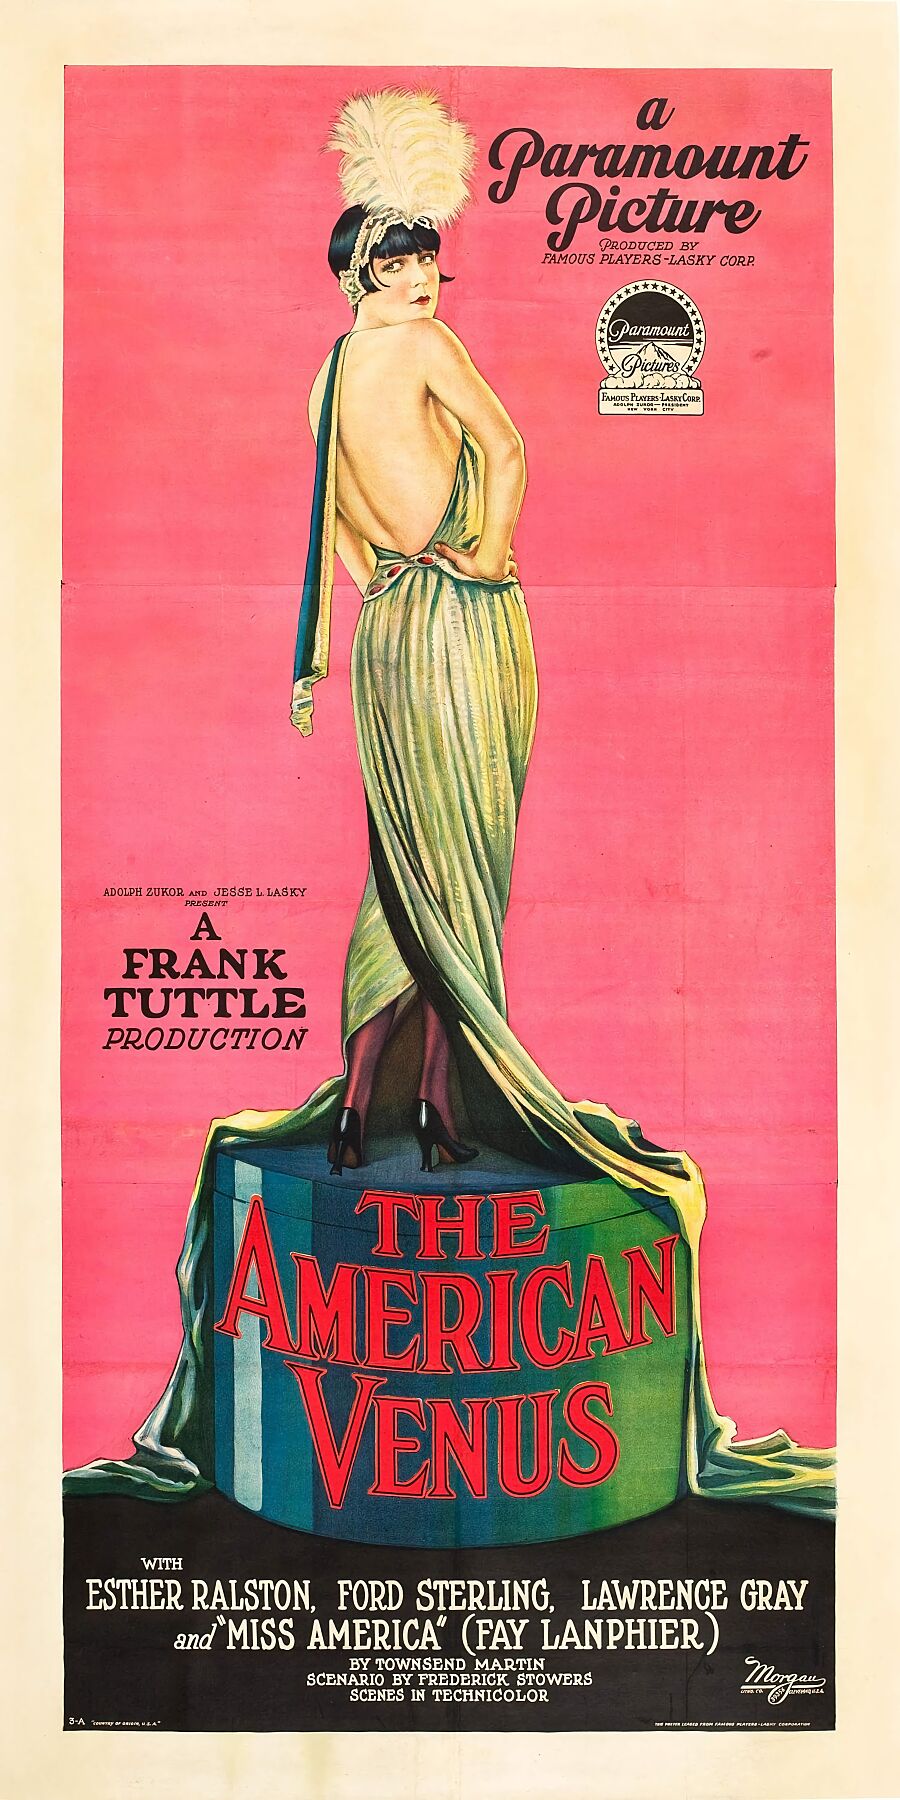 The American Venus is a 1926 American silent comedy film directed by Frank Tuttle 1926